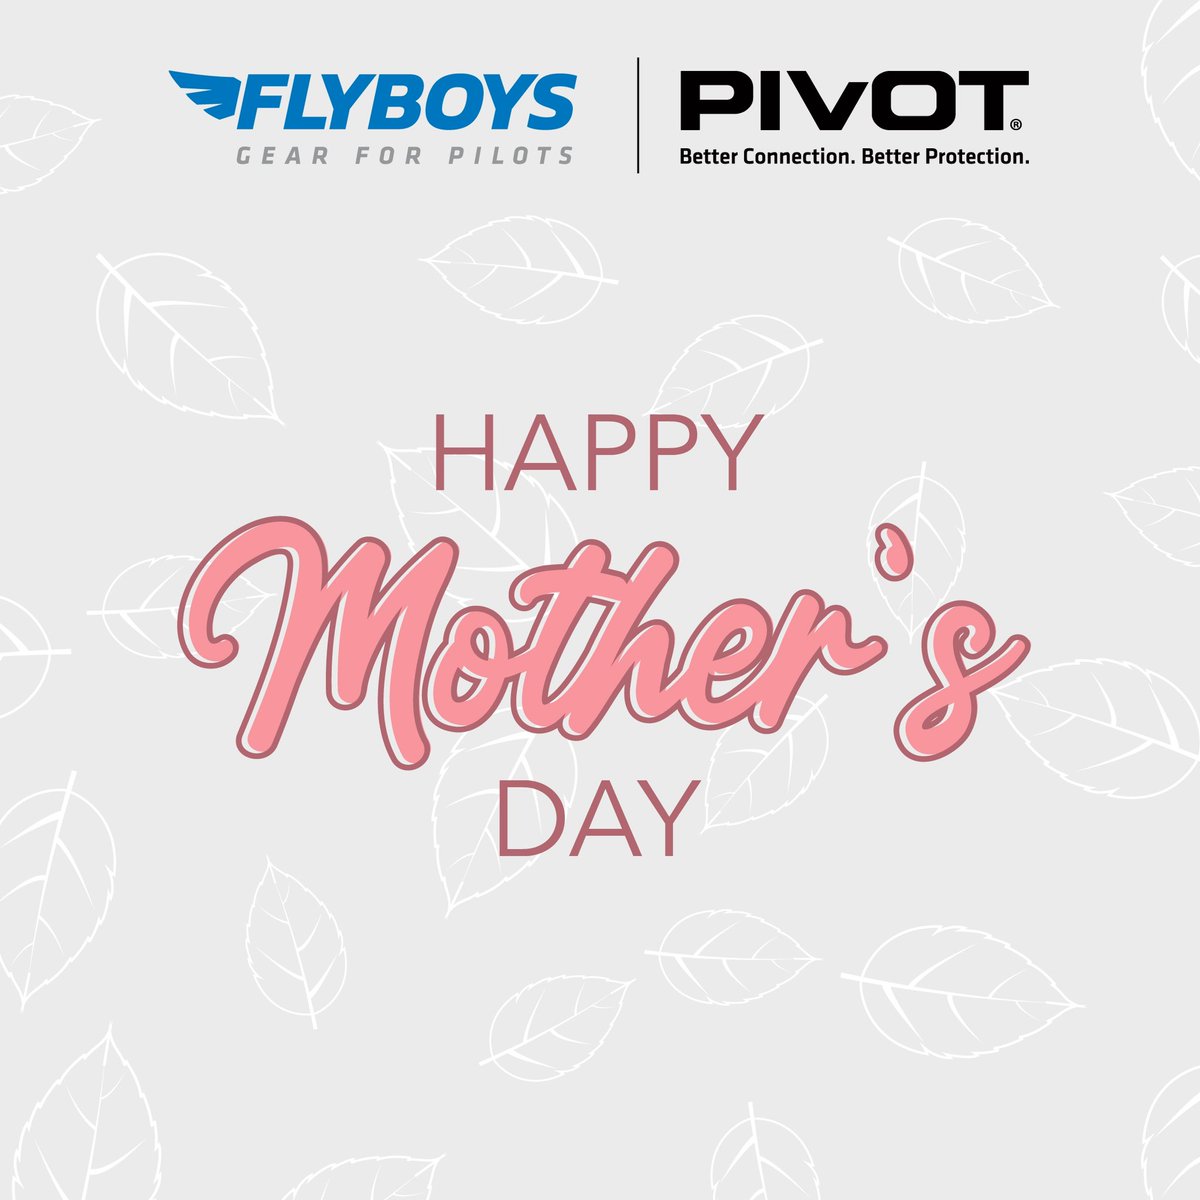 Happy Mother's Day to all the incredible moms out there from us at FlyBoys and PIVOT!

Here's to you, today and always!